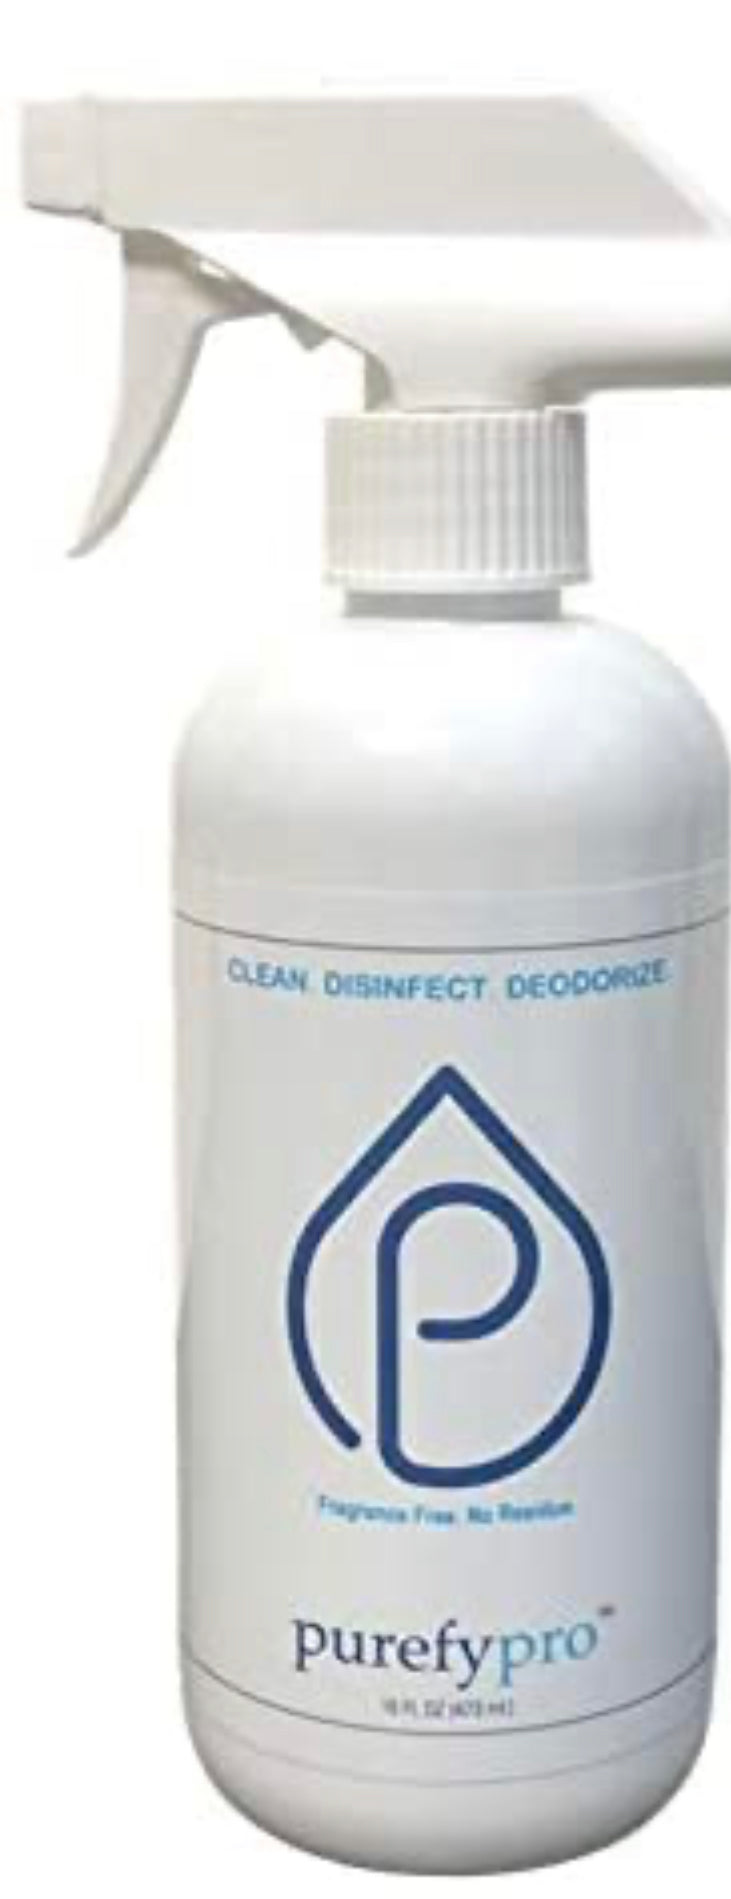 NMS disinfectant spray